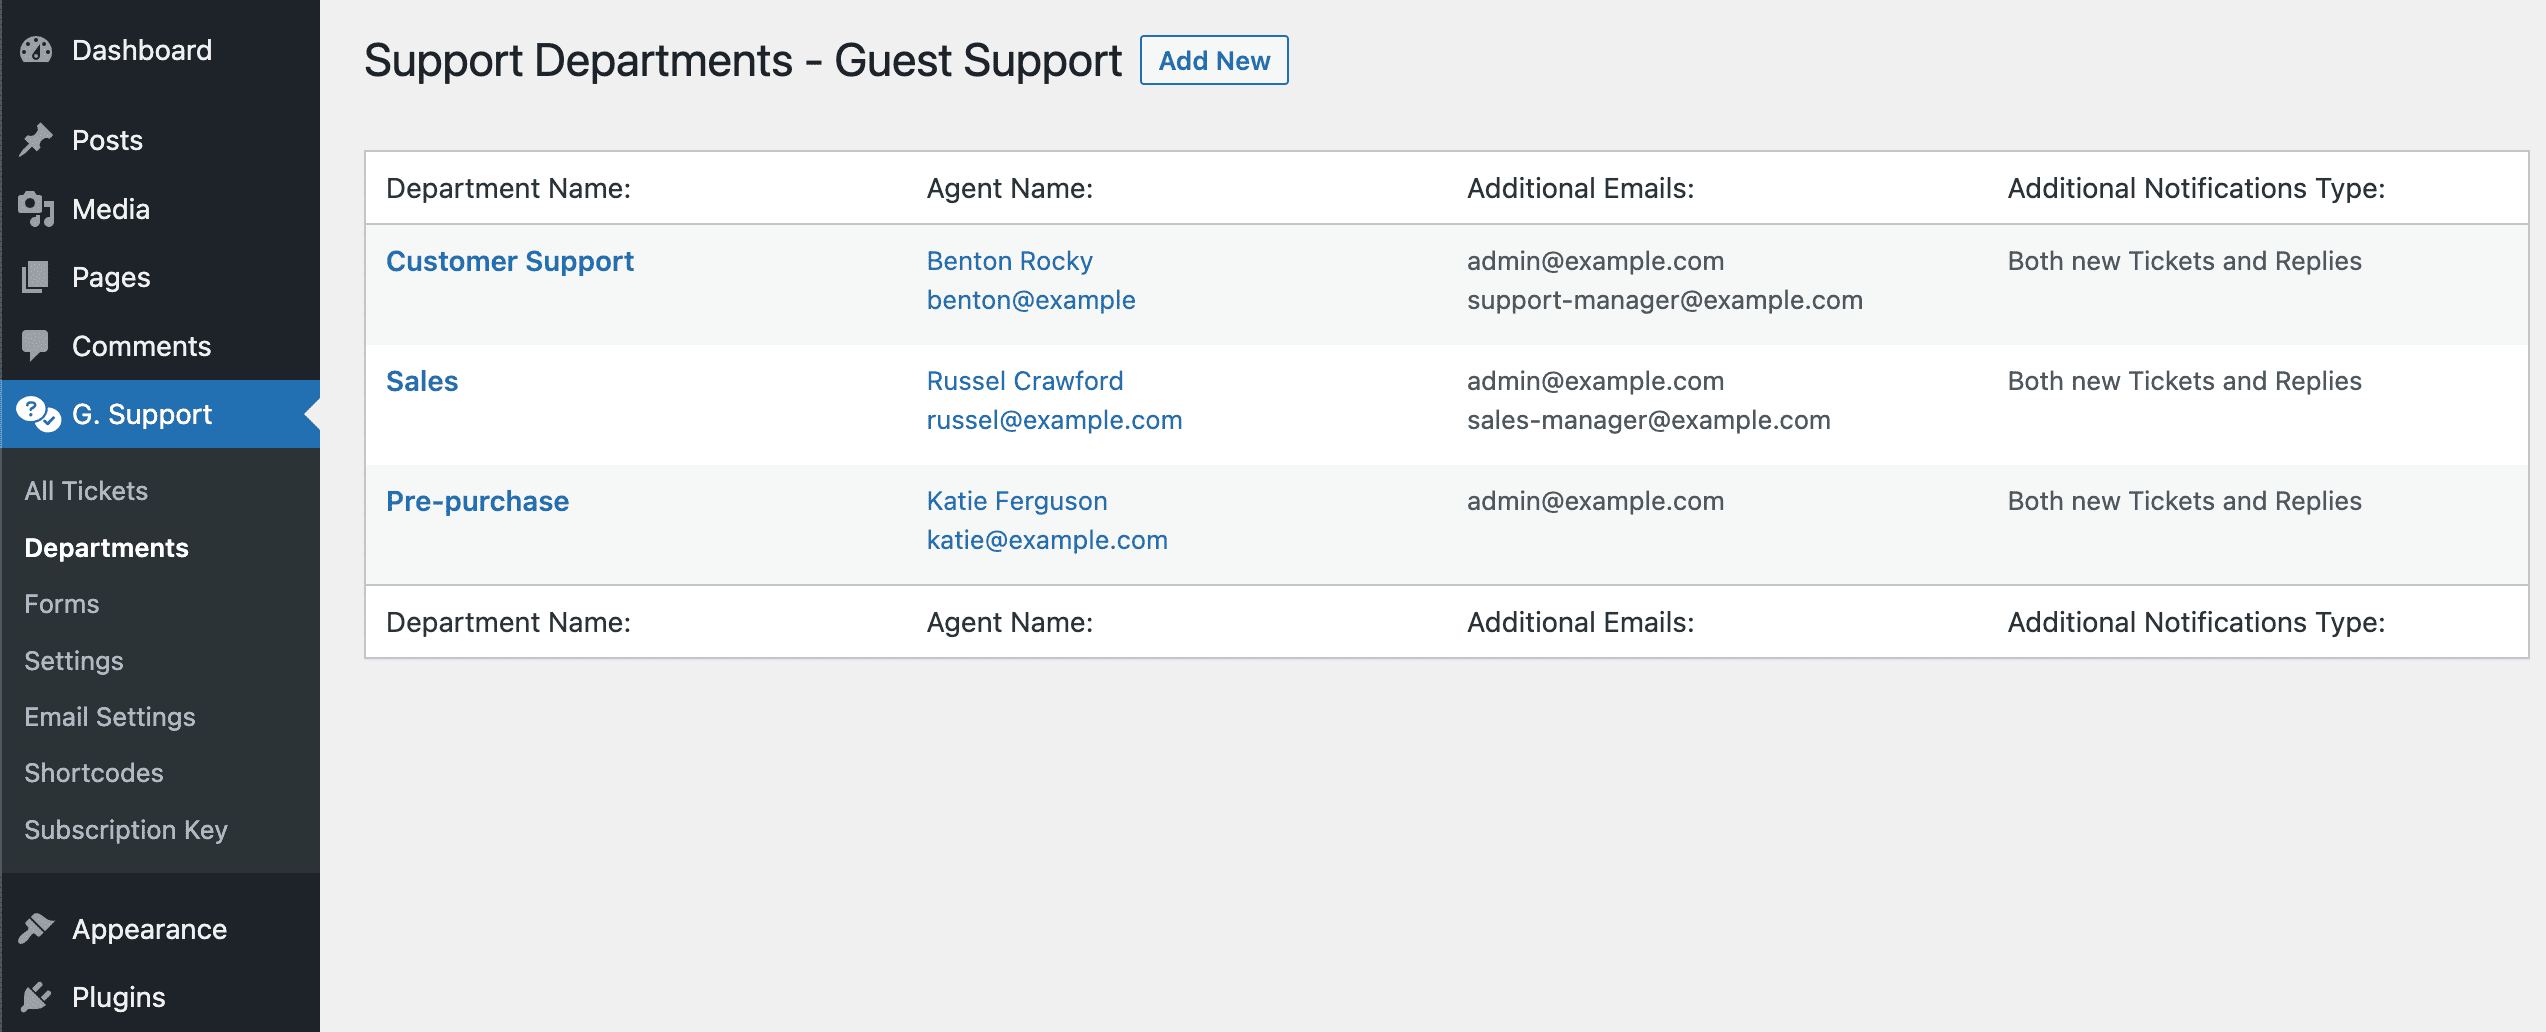 Guest support list of departments